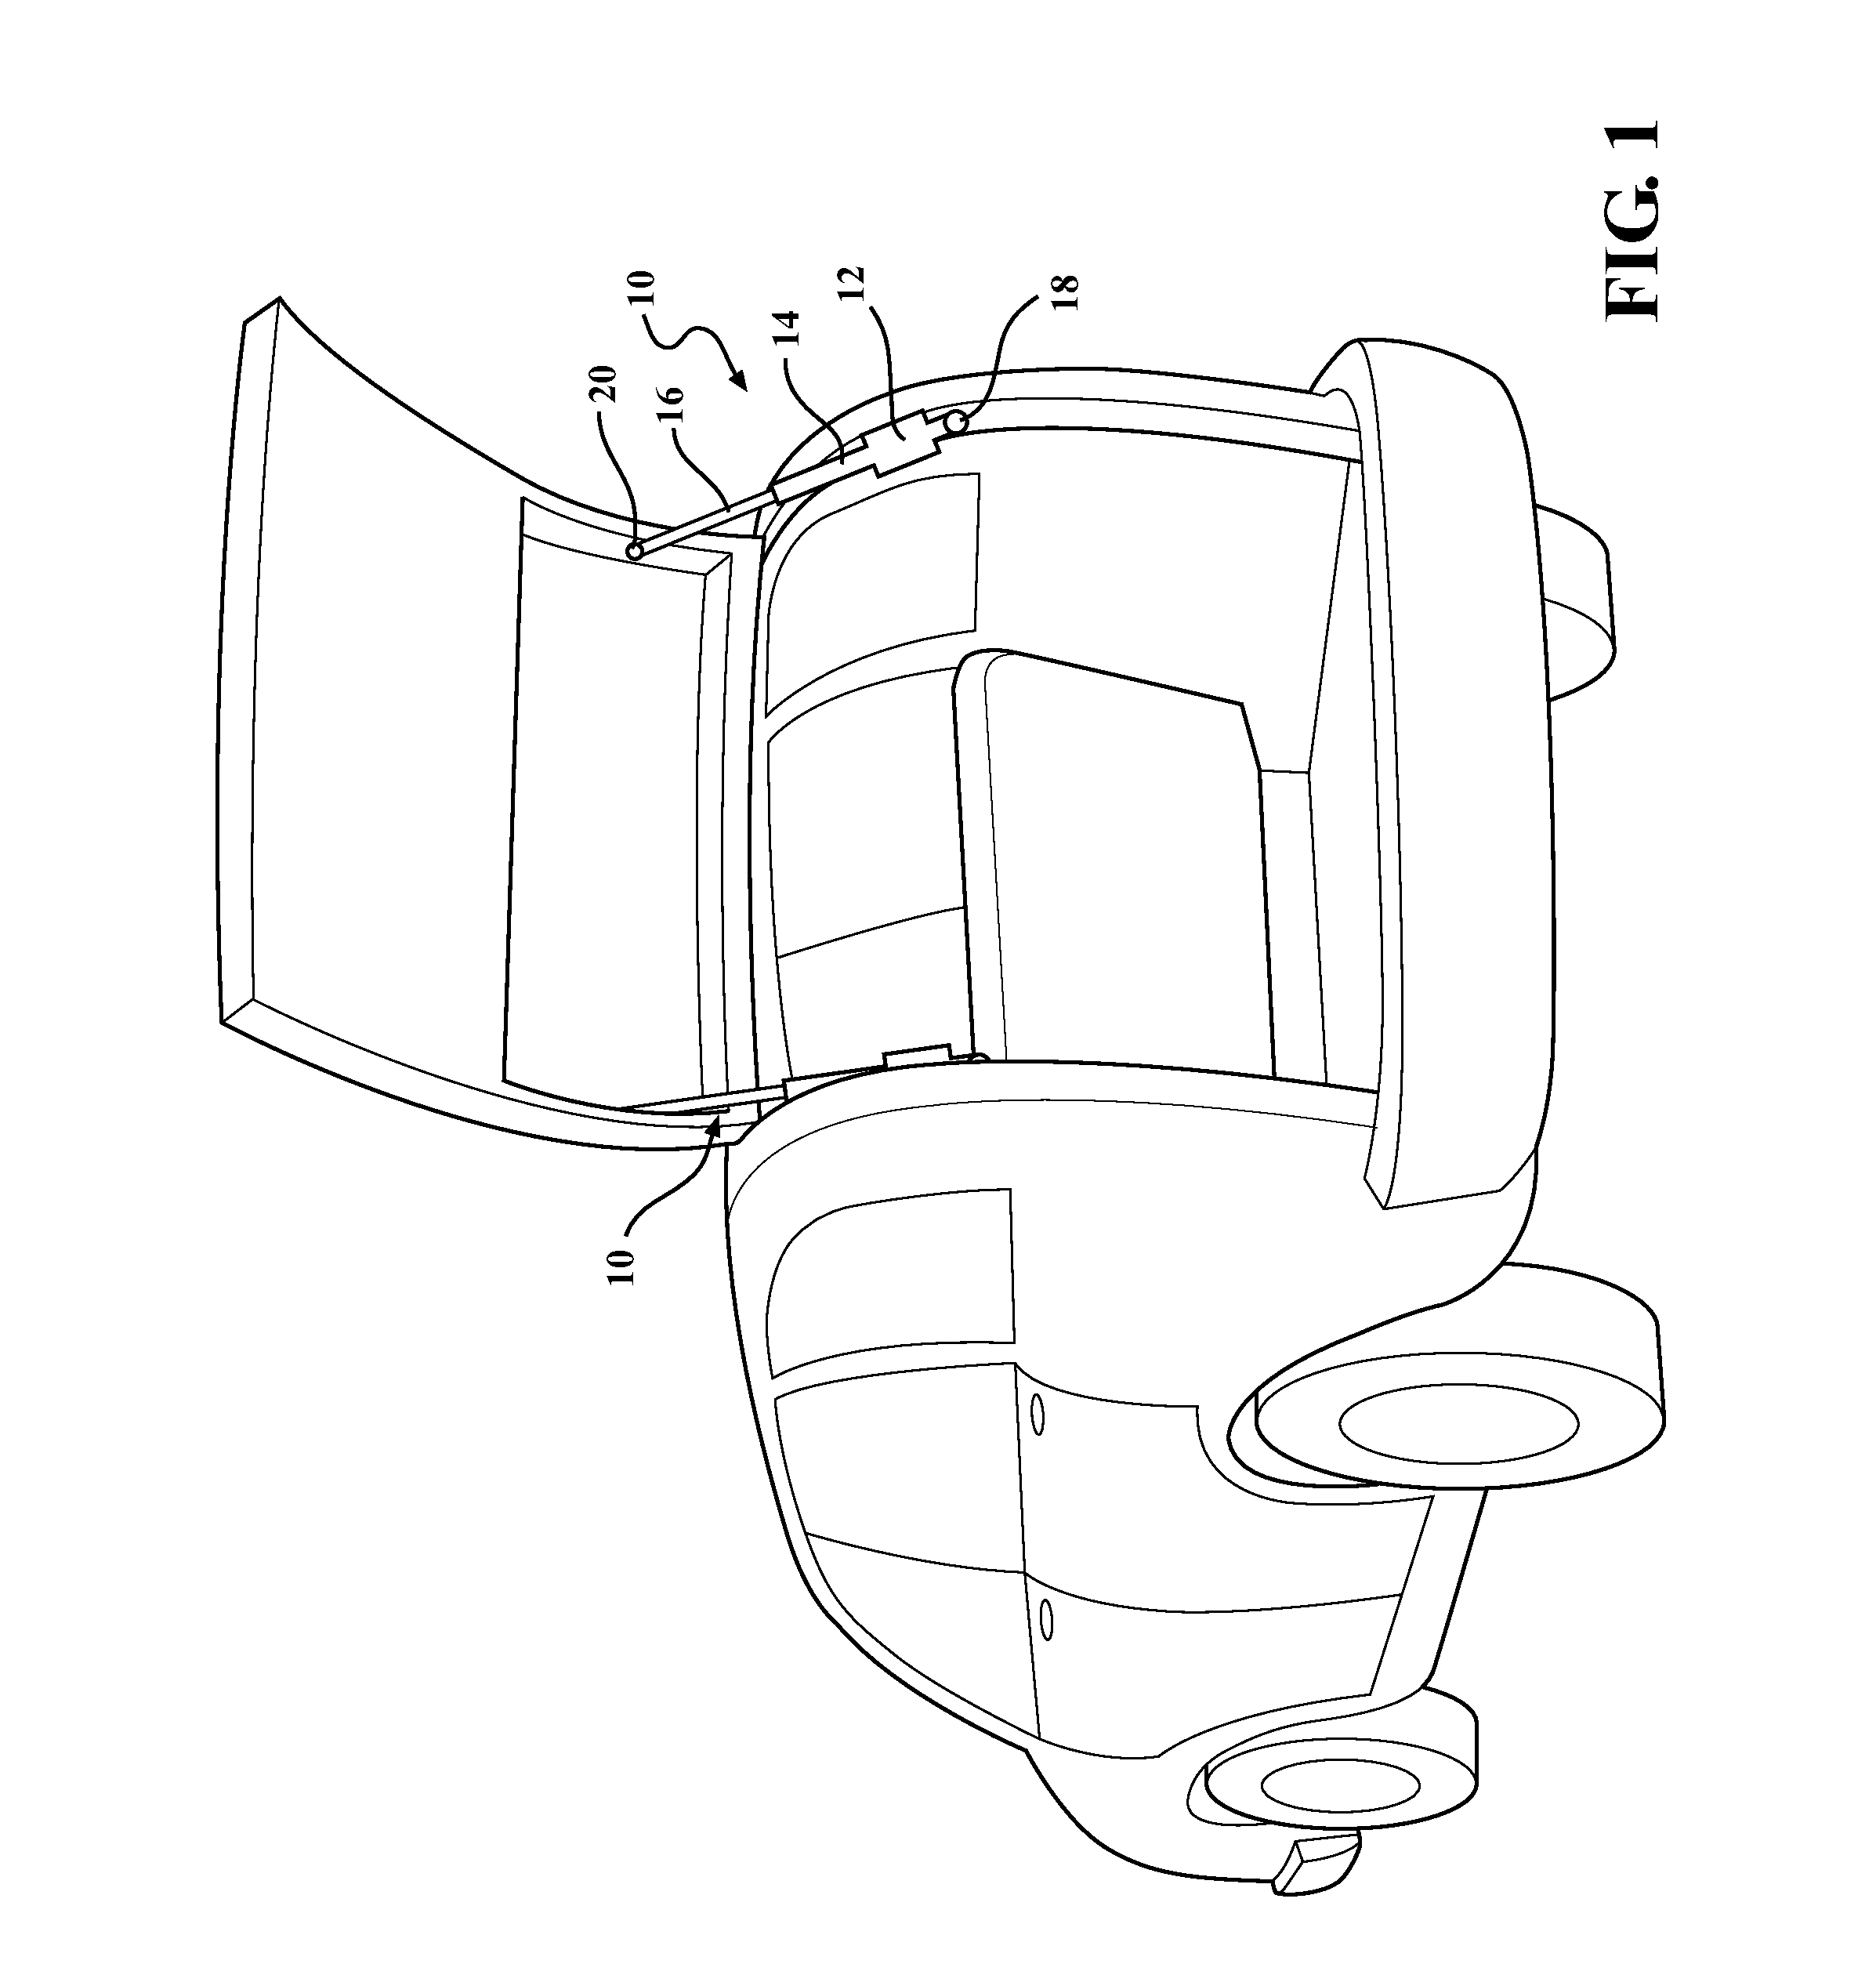 Electromechanical strut with integrated flex coupling and slip device and clutch/coupling assembly therefor